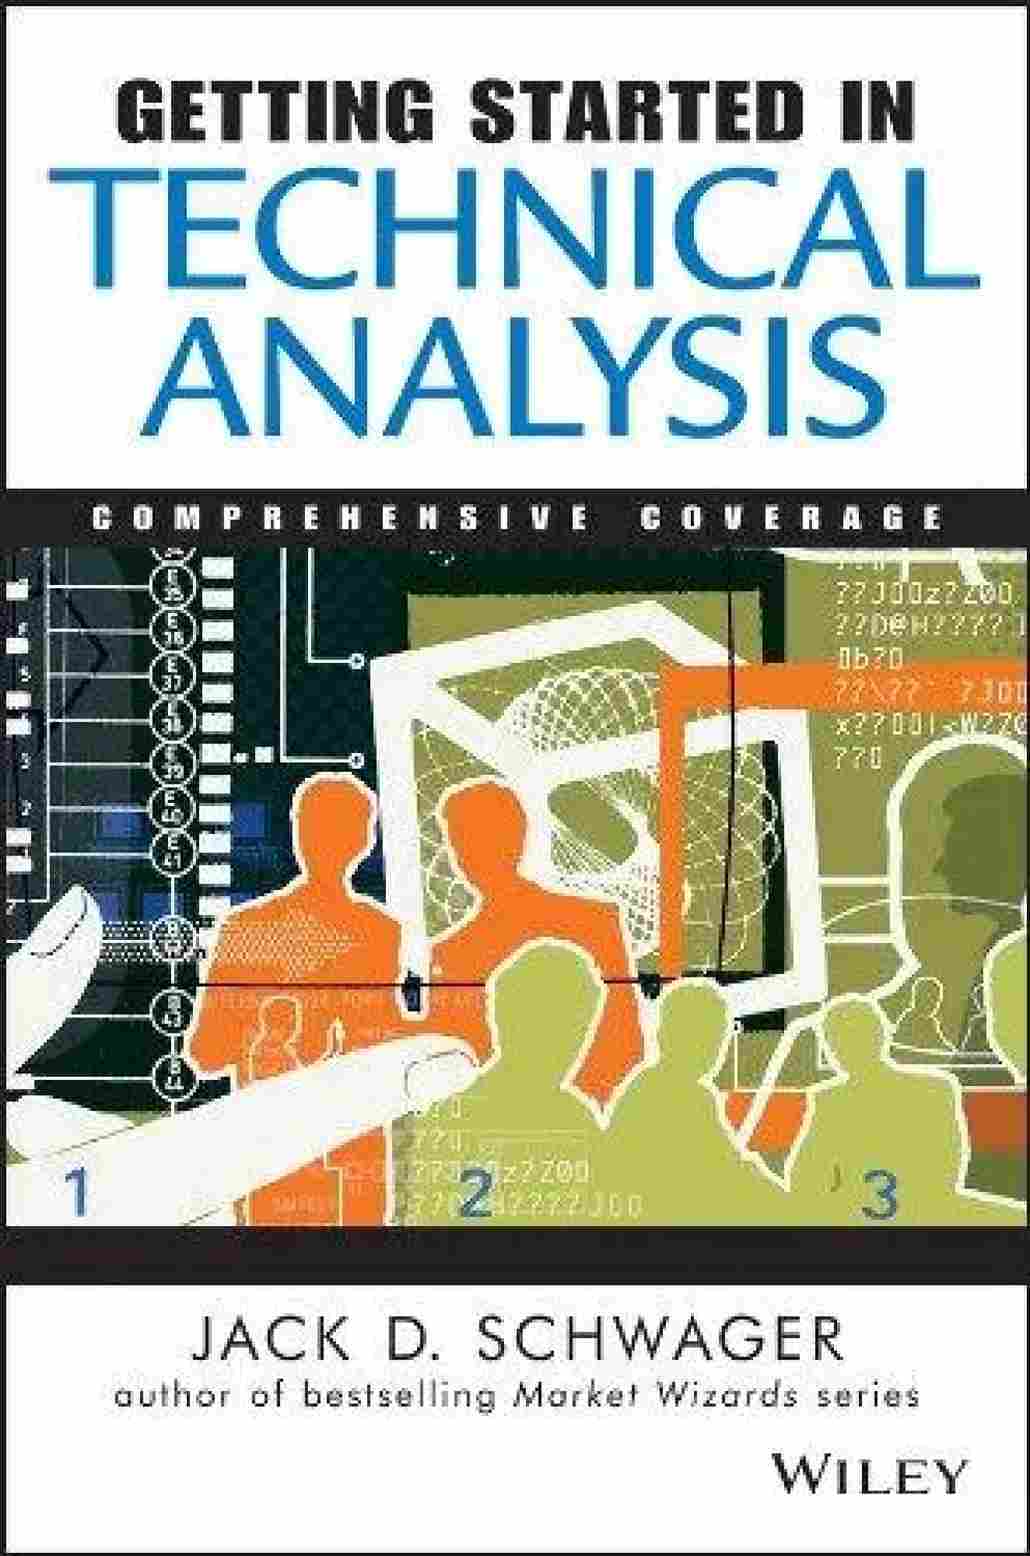 Getting Started in Technical Analysis (Paperback) - Jack D. Schwager